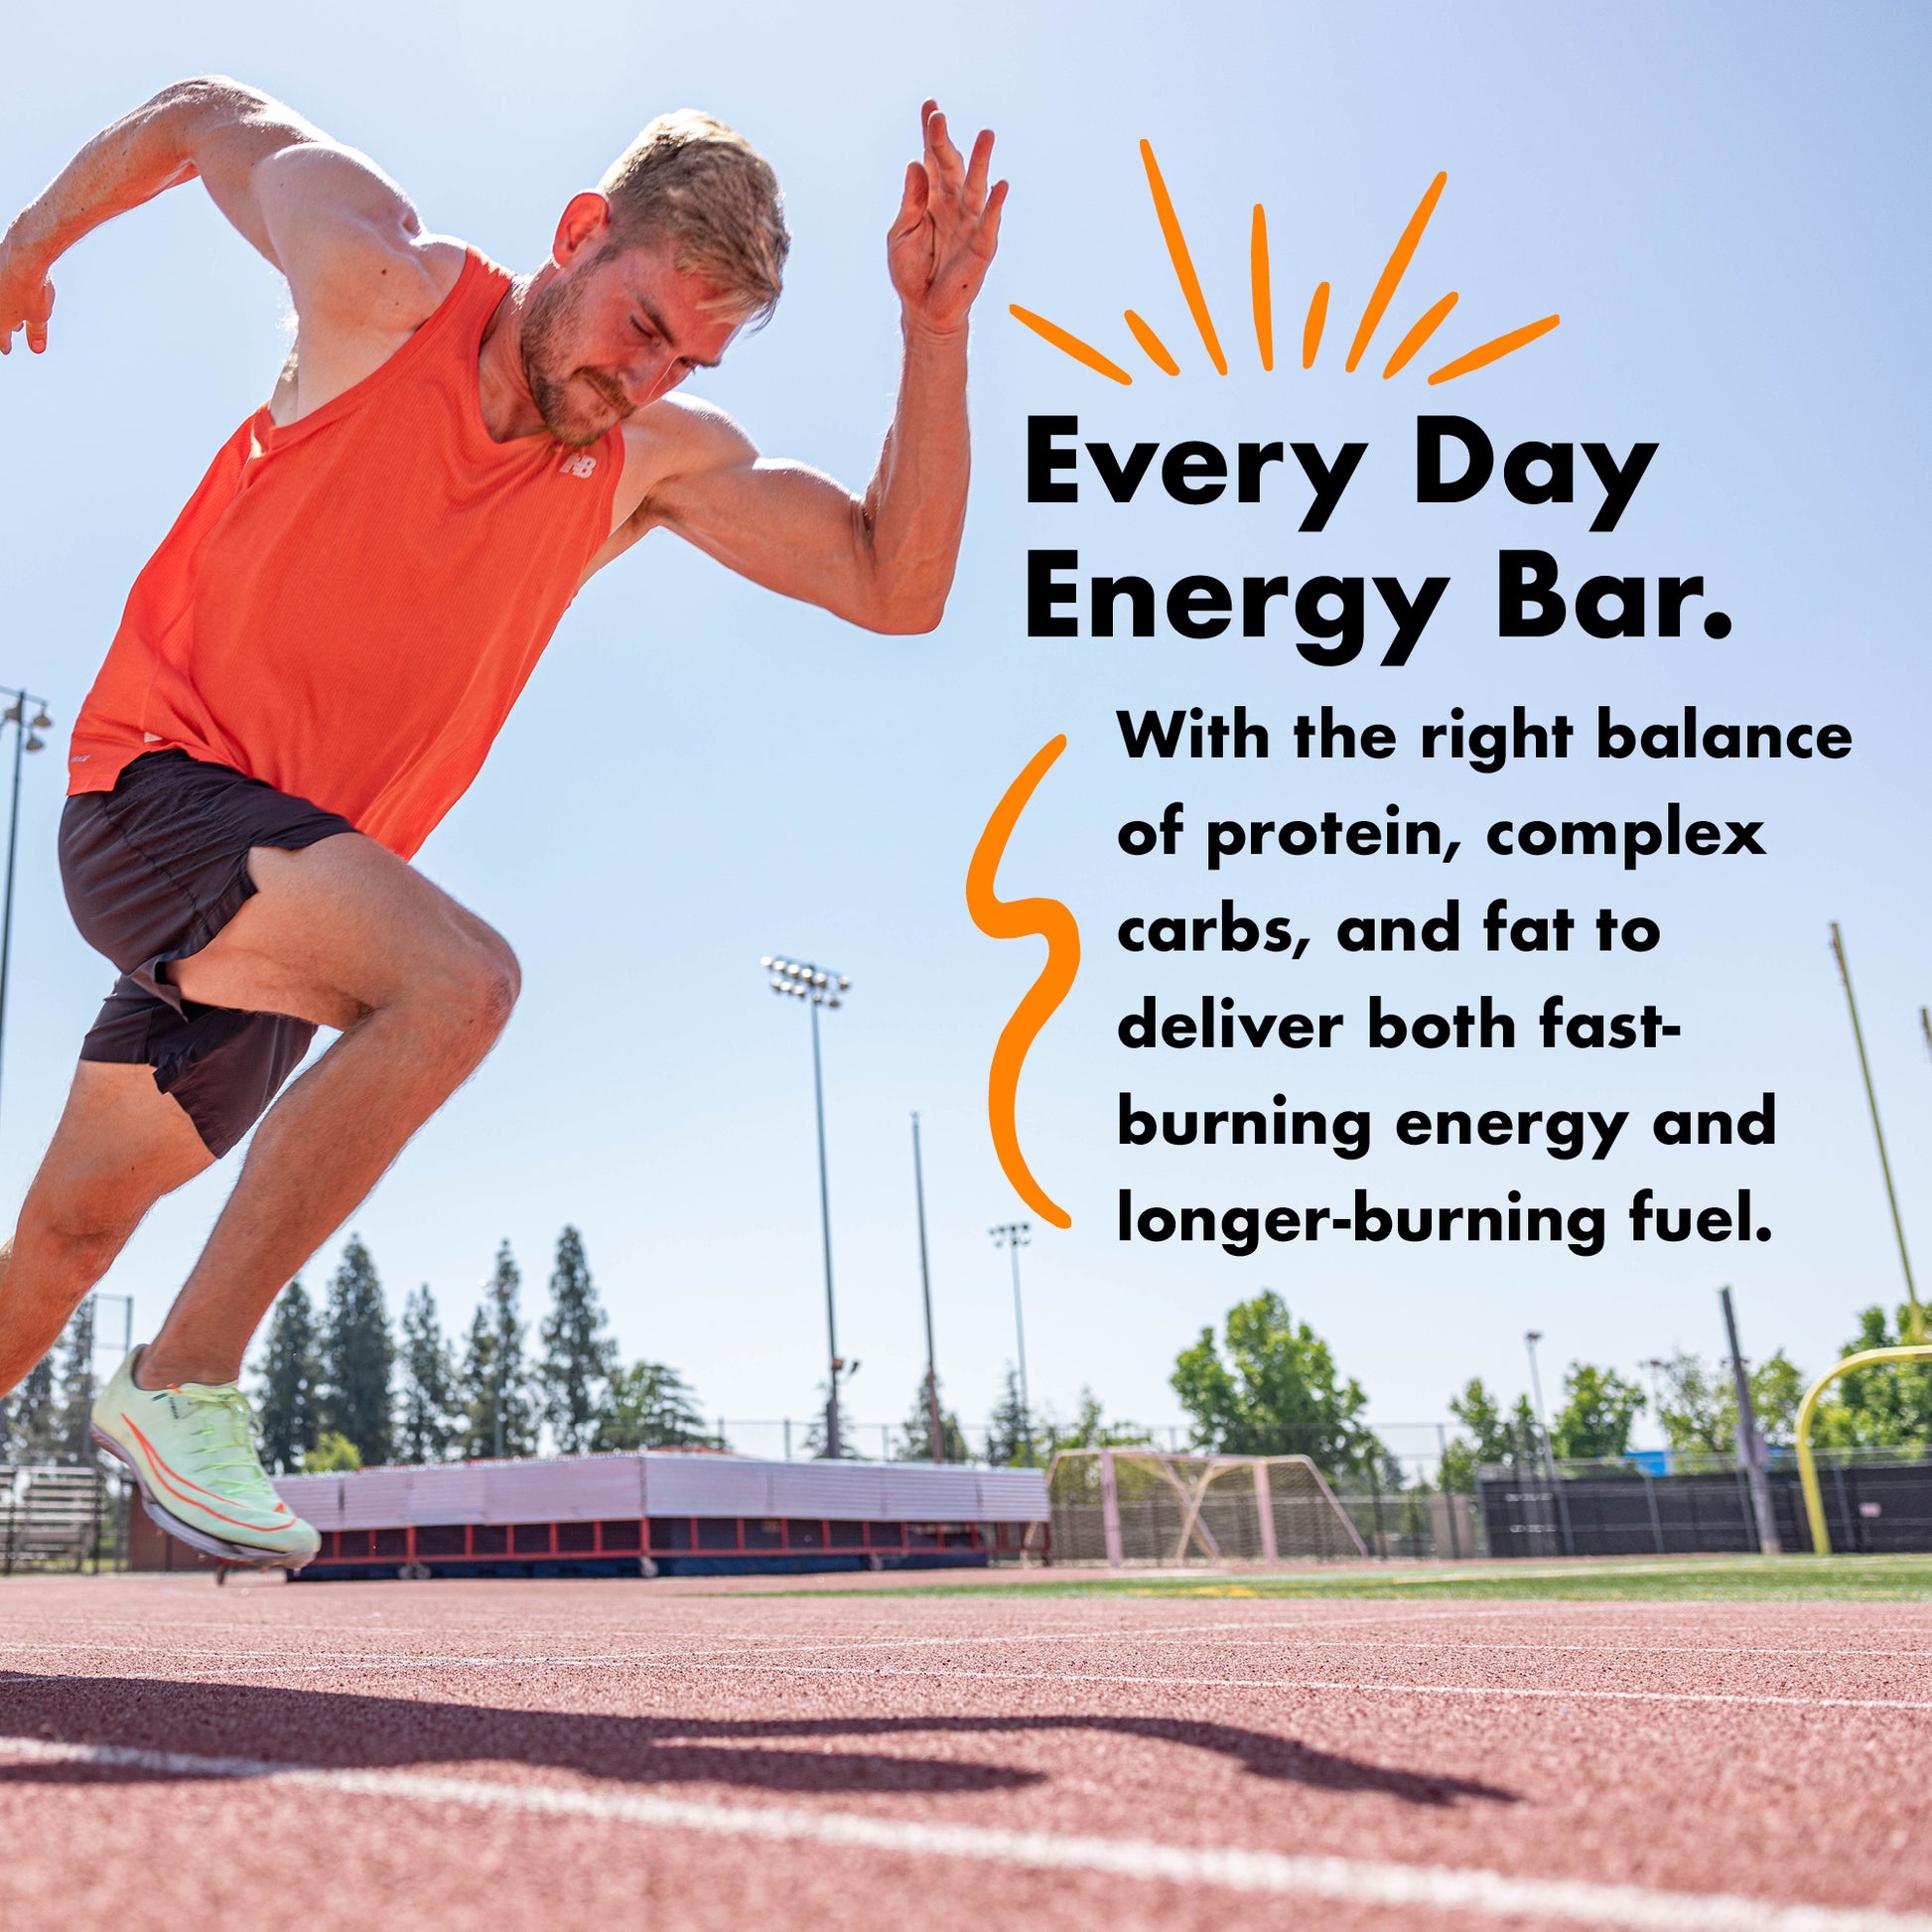 Every Day Energy Bar. With the right balance of protein, complex carbs, and fat to deliver both fast-burning energy and longer-burning fuel.